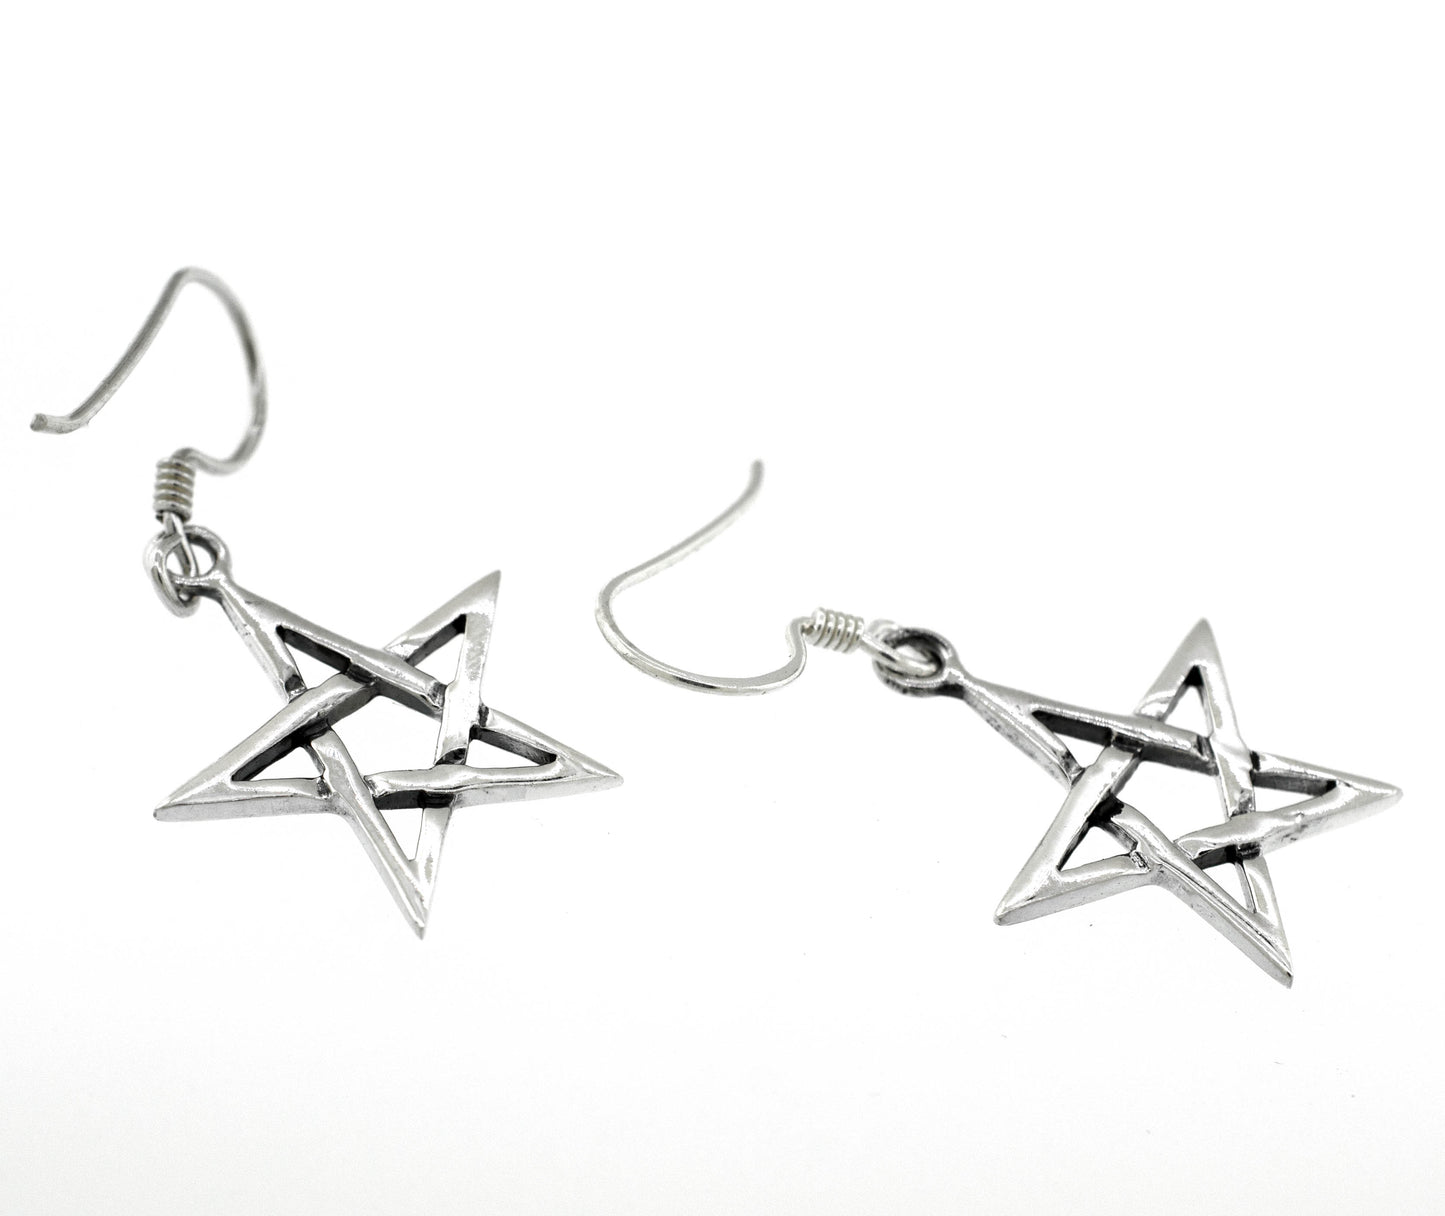 A pair of Super Silver sterling silver pentagram earrings on a white background.